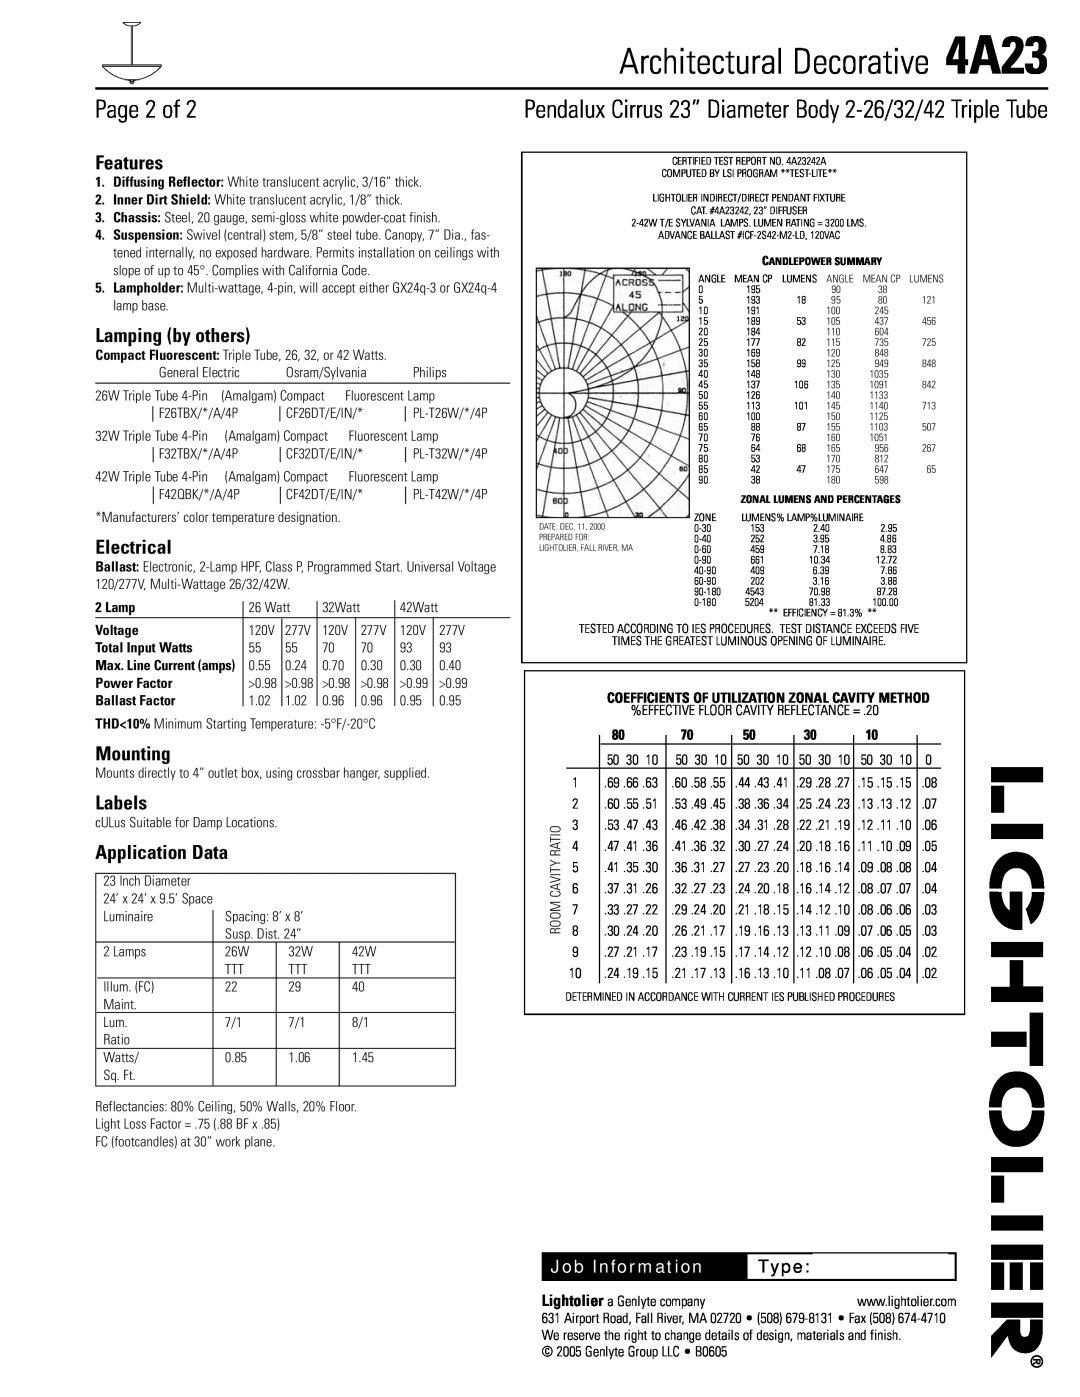 Lightolier 4A23 Page 2 of, Features, Lamping by others, Electrical, Mounting, Labels, Application Data, Job Information 